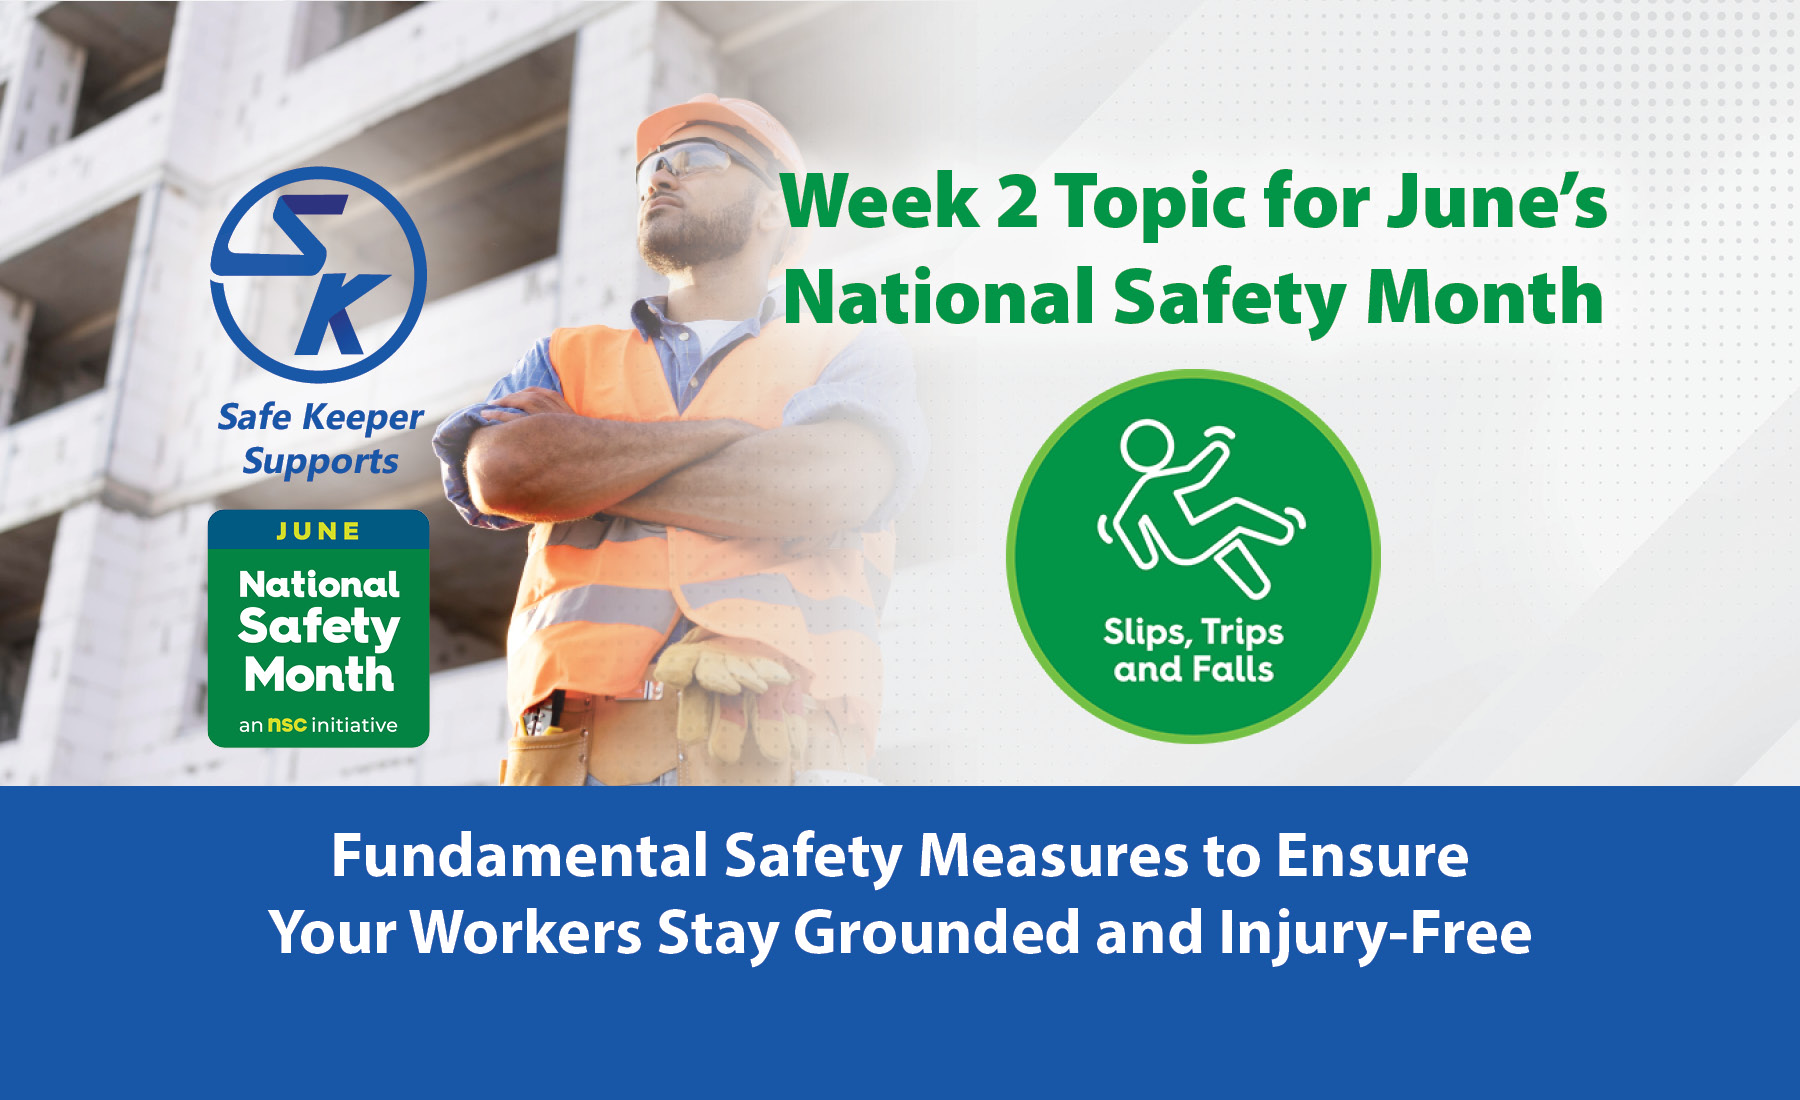 Week 2 Topic for June’s National Safety Month: Slips, Trips, and Falls